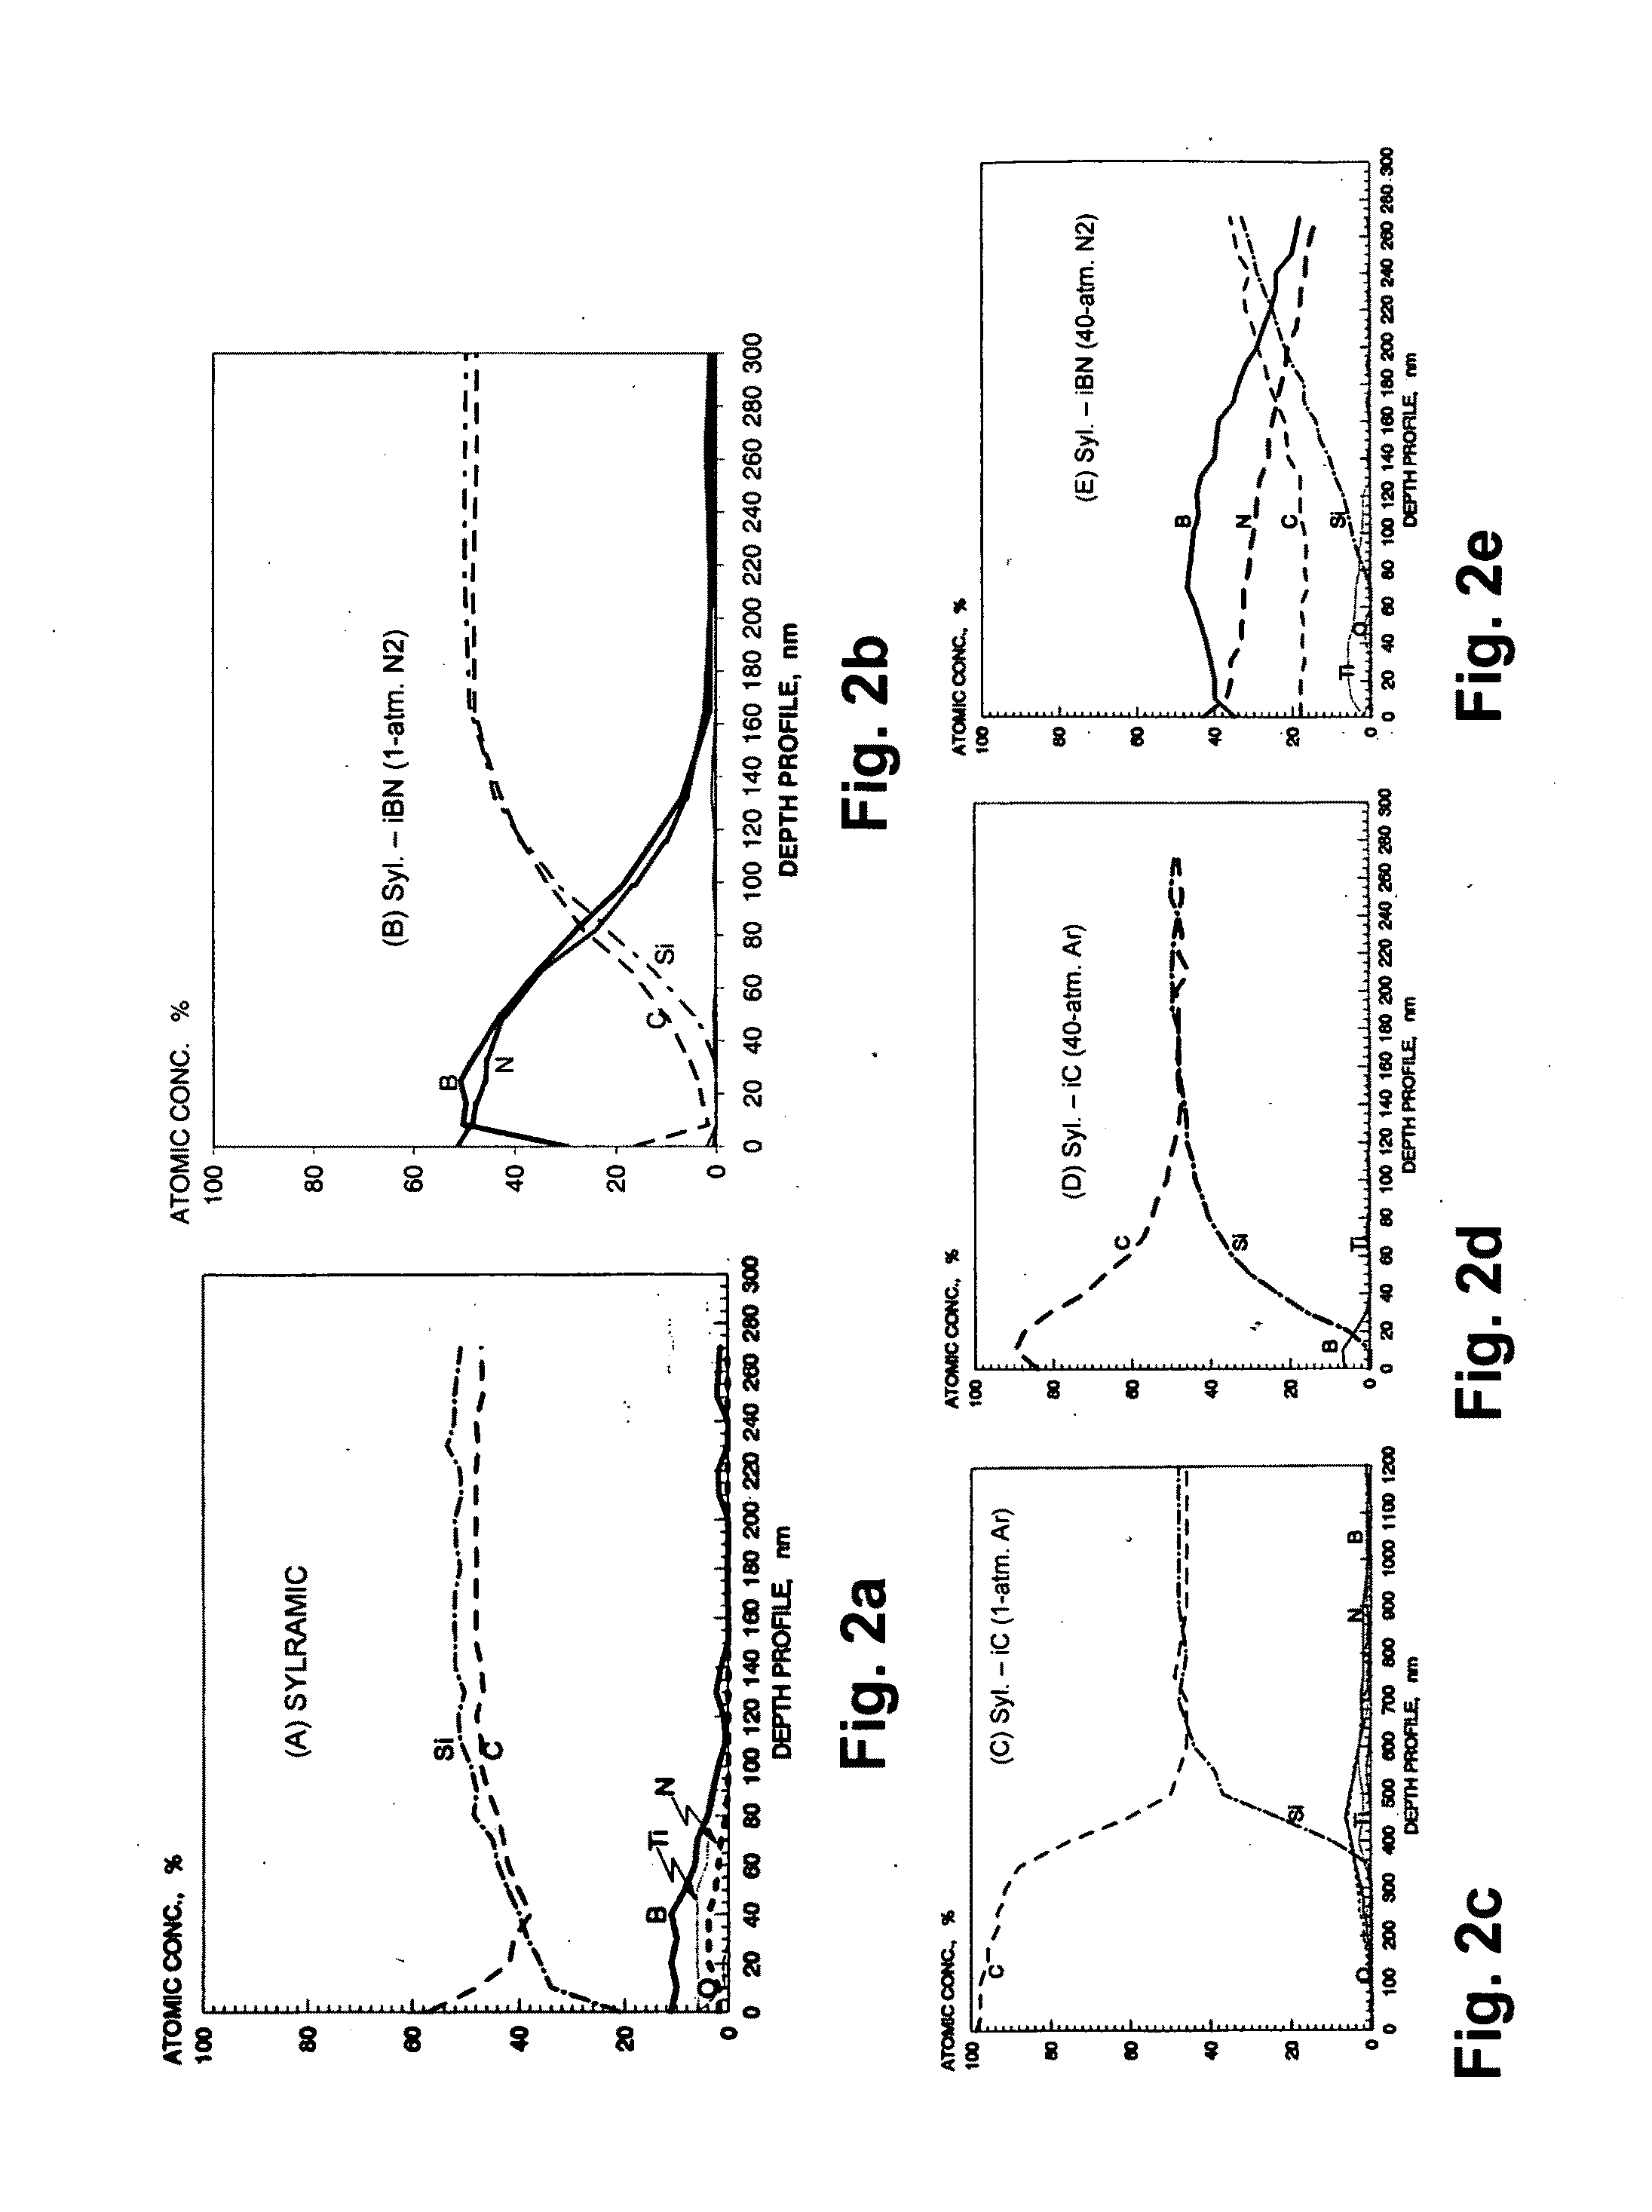 Methods for Producing High-Performance Silicon Carbide Fibers, Architectural Preforms, and High-Temperature Composite Structures